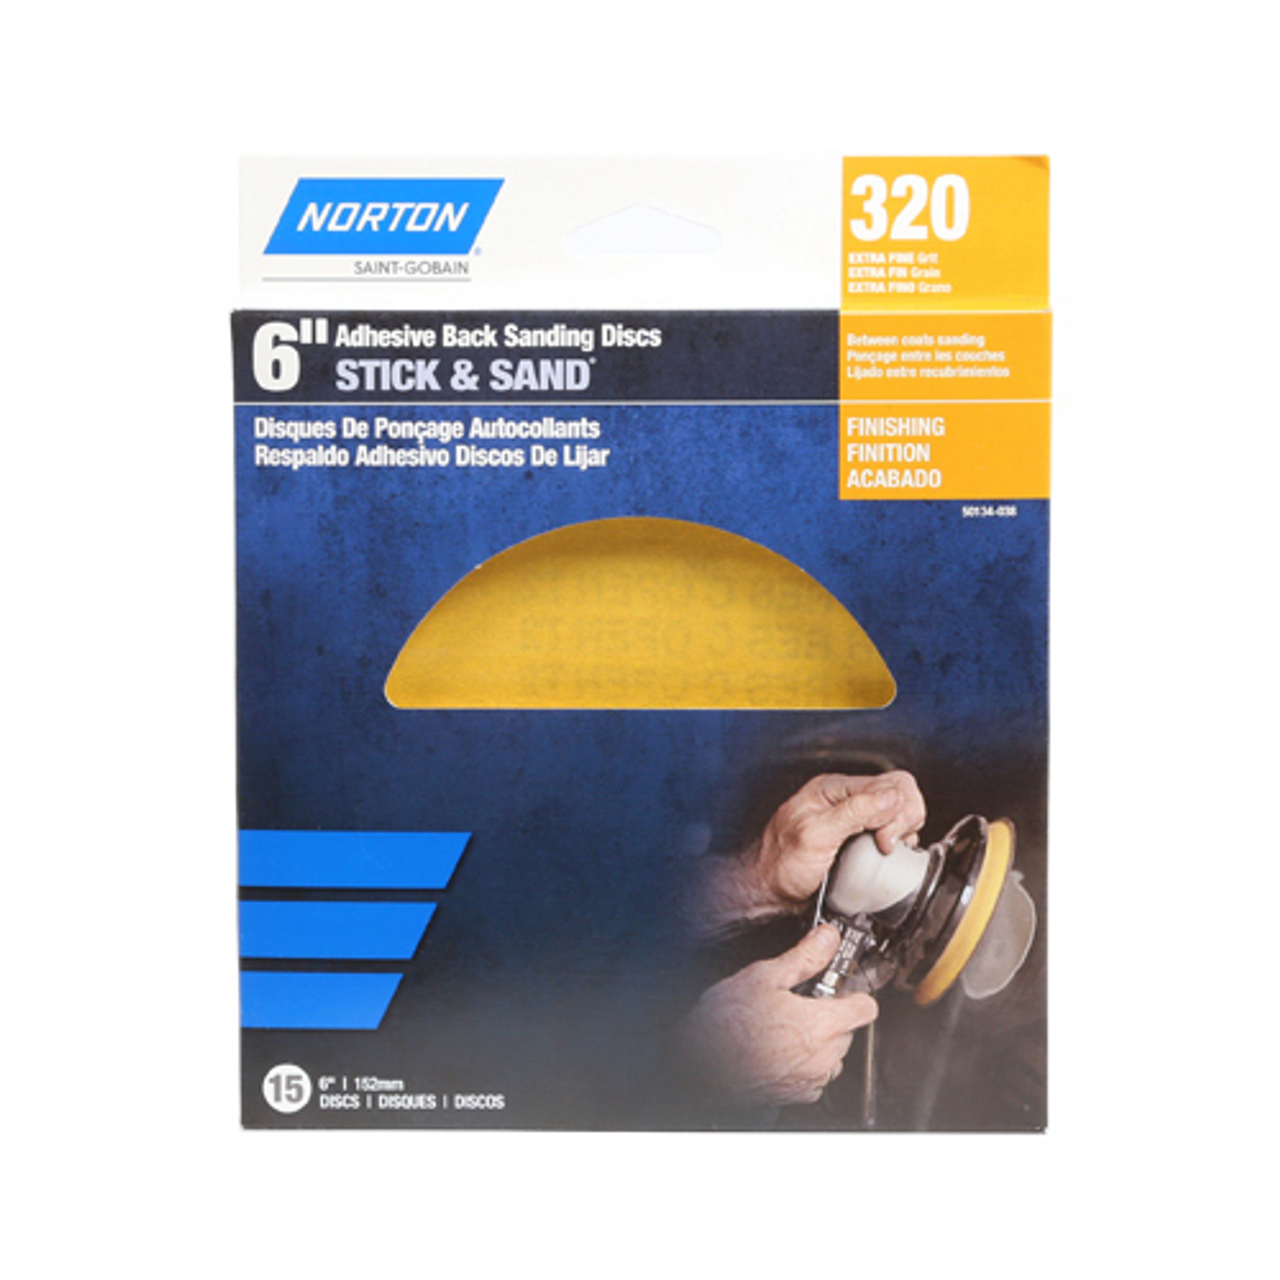 NORTON (50134-038) Adhesive-back Sanding Discs, Gold, 320 Grit, 6-in., 1-Pack/15-Discs